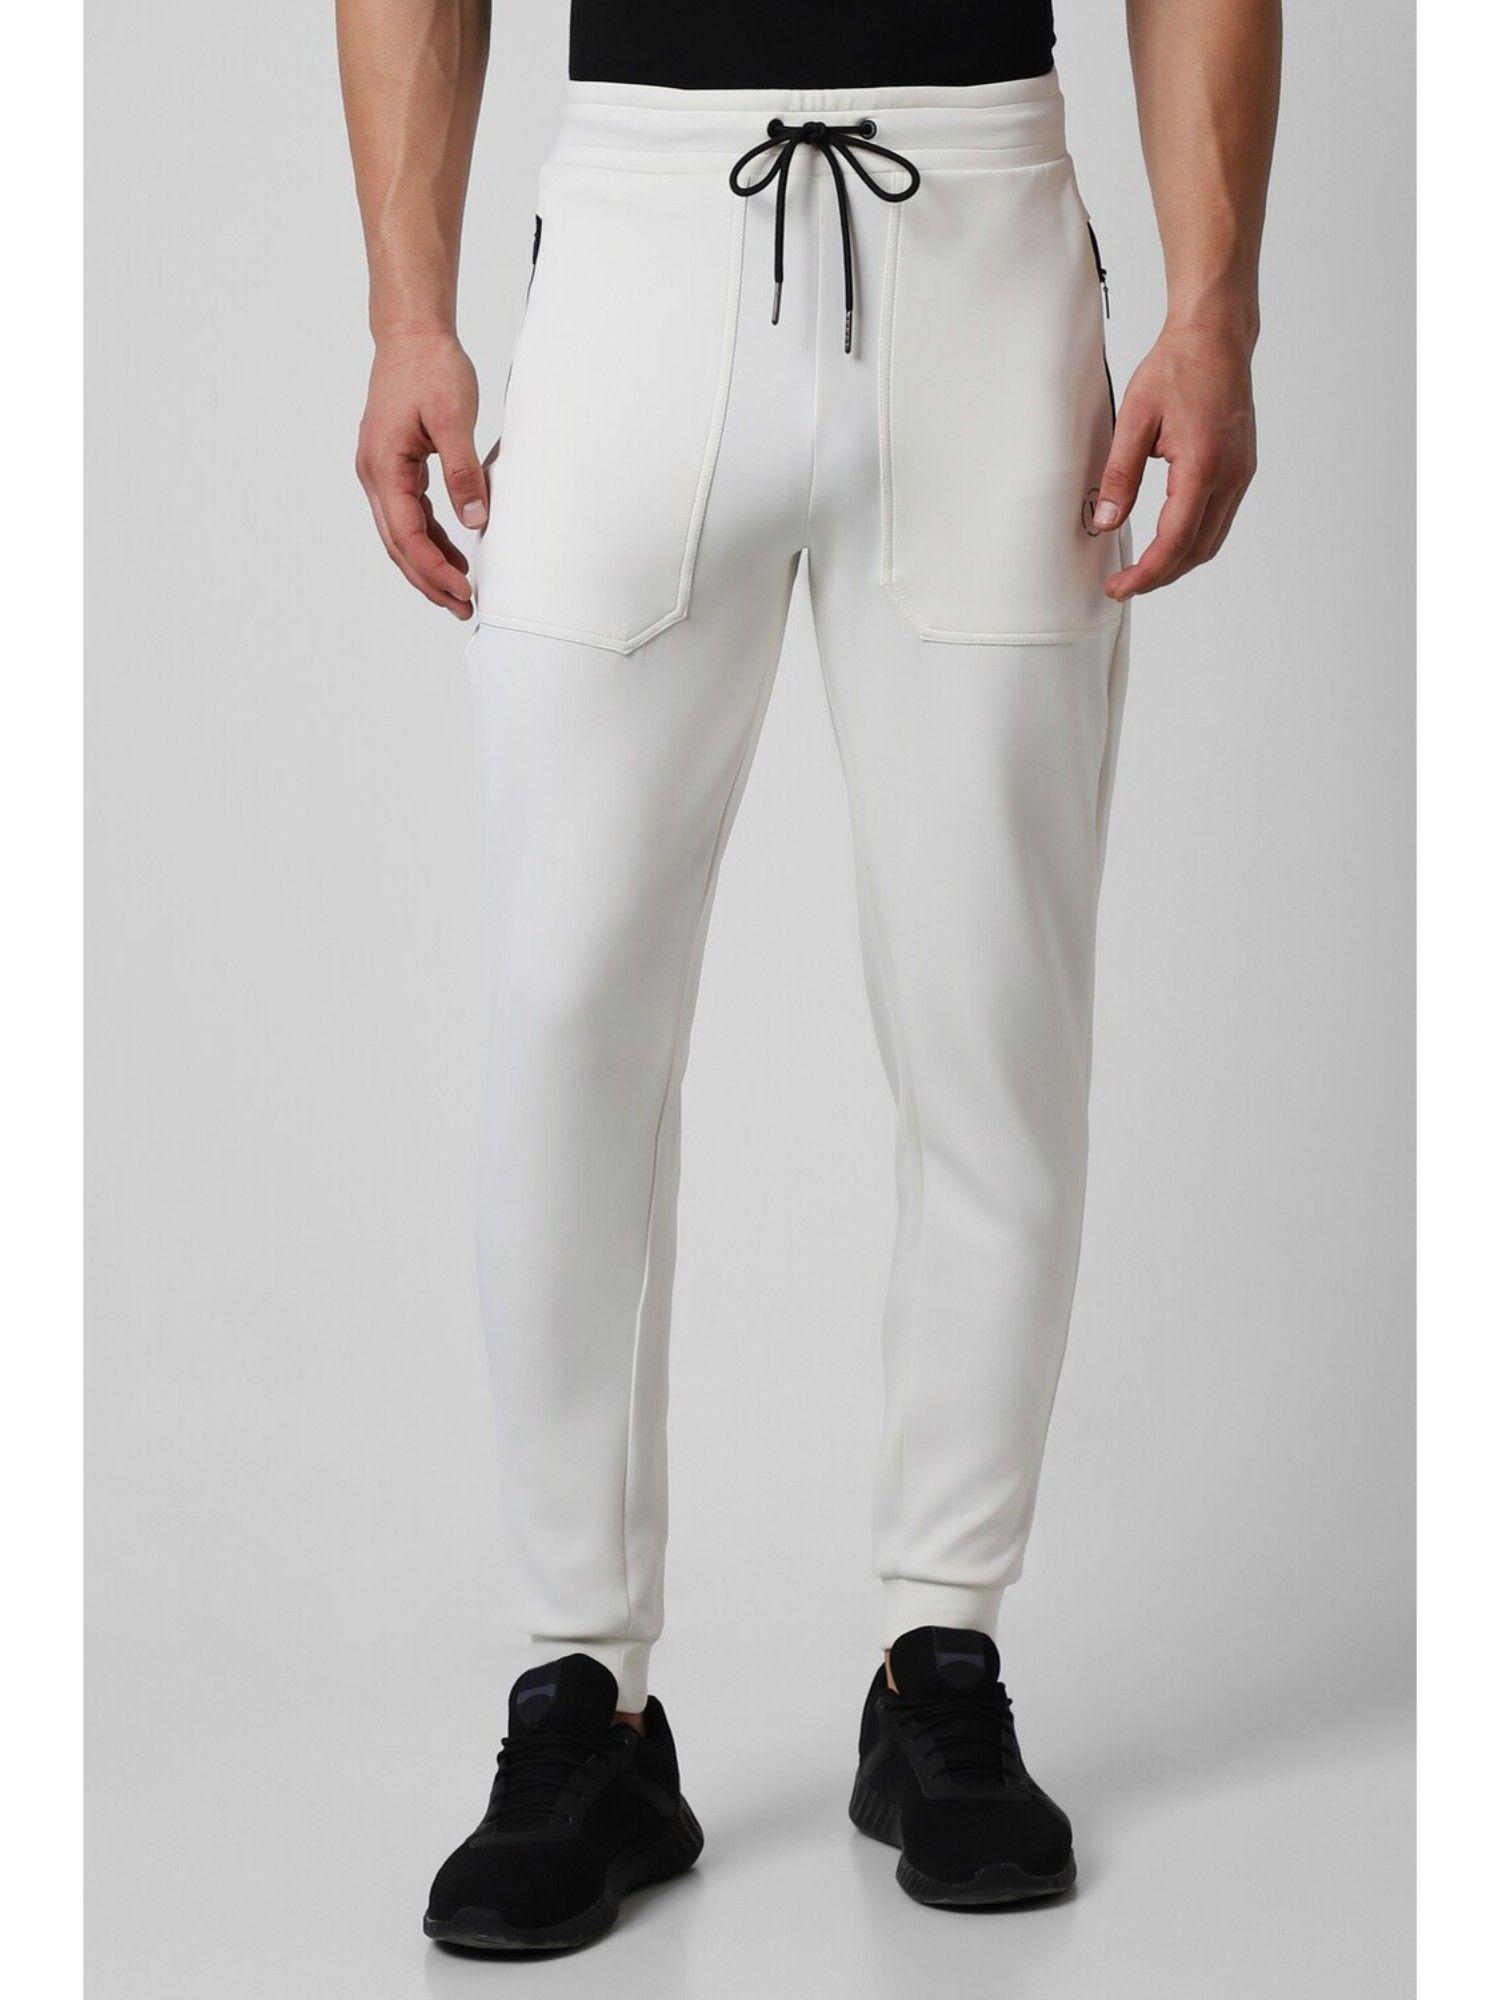 men-off-white-solid-casual-jogger-pants